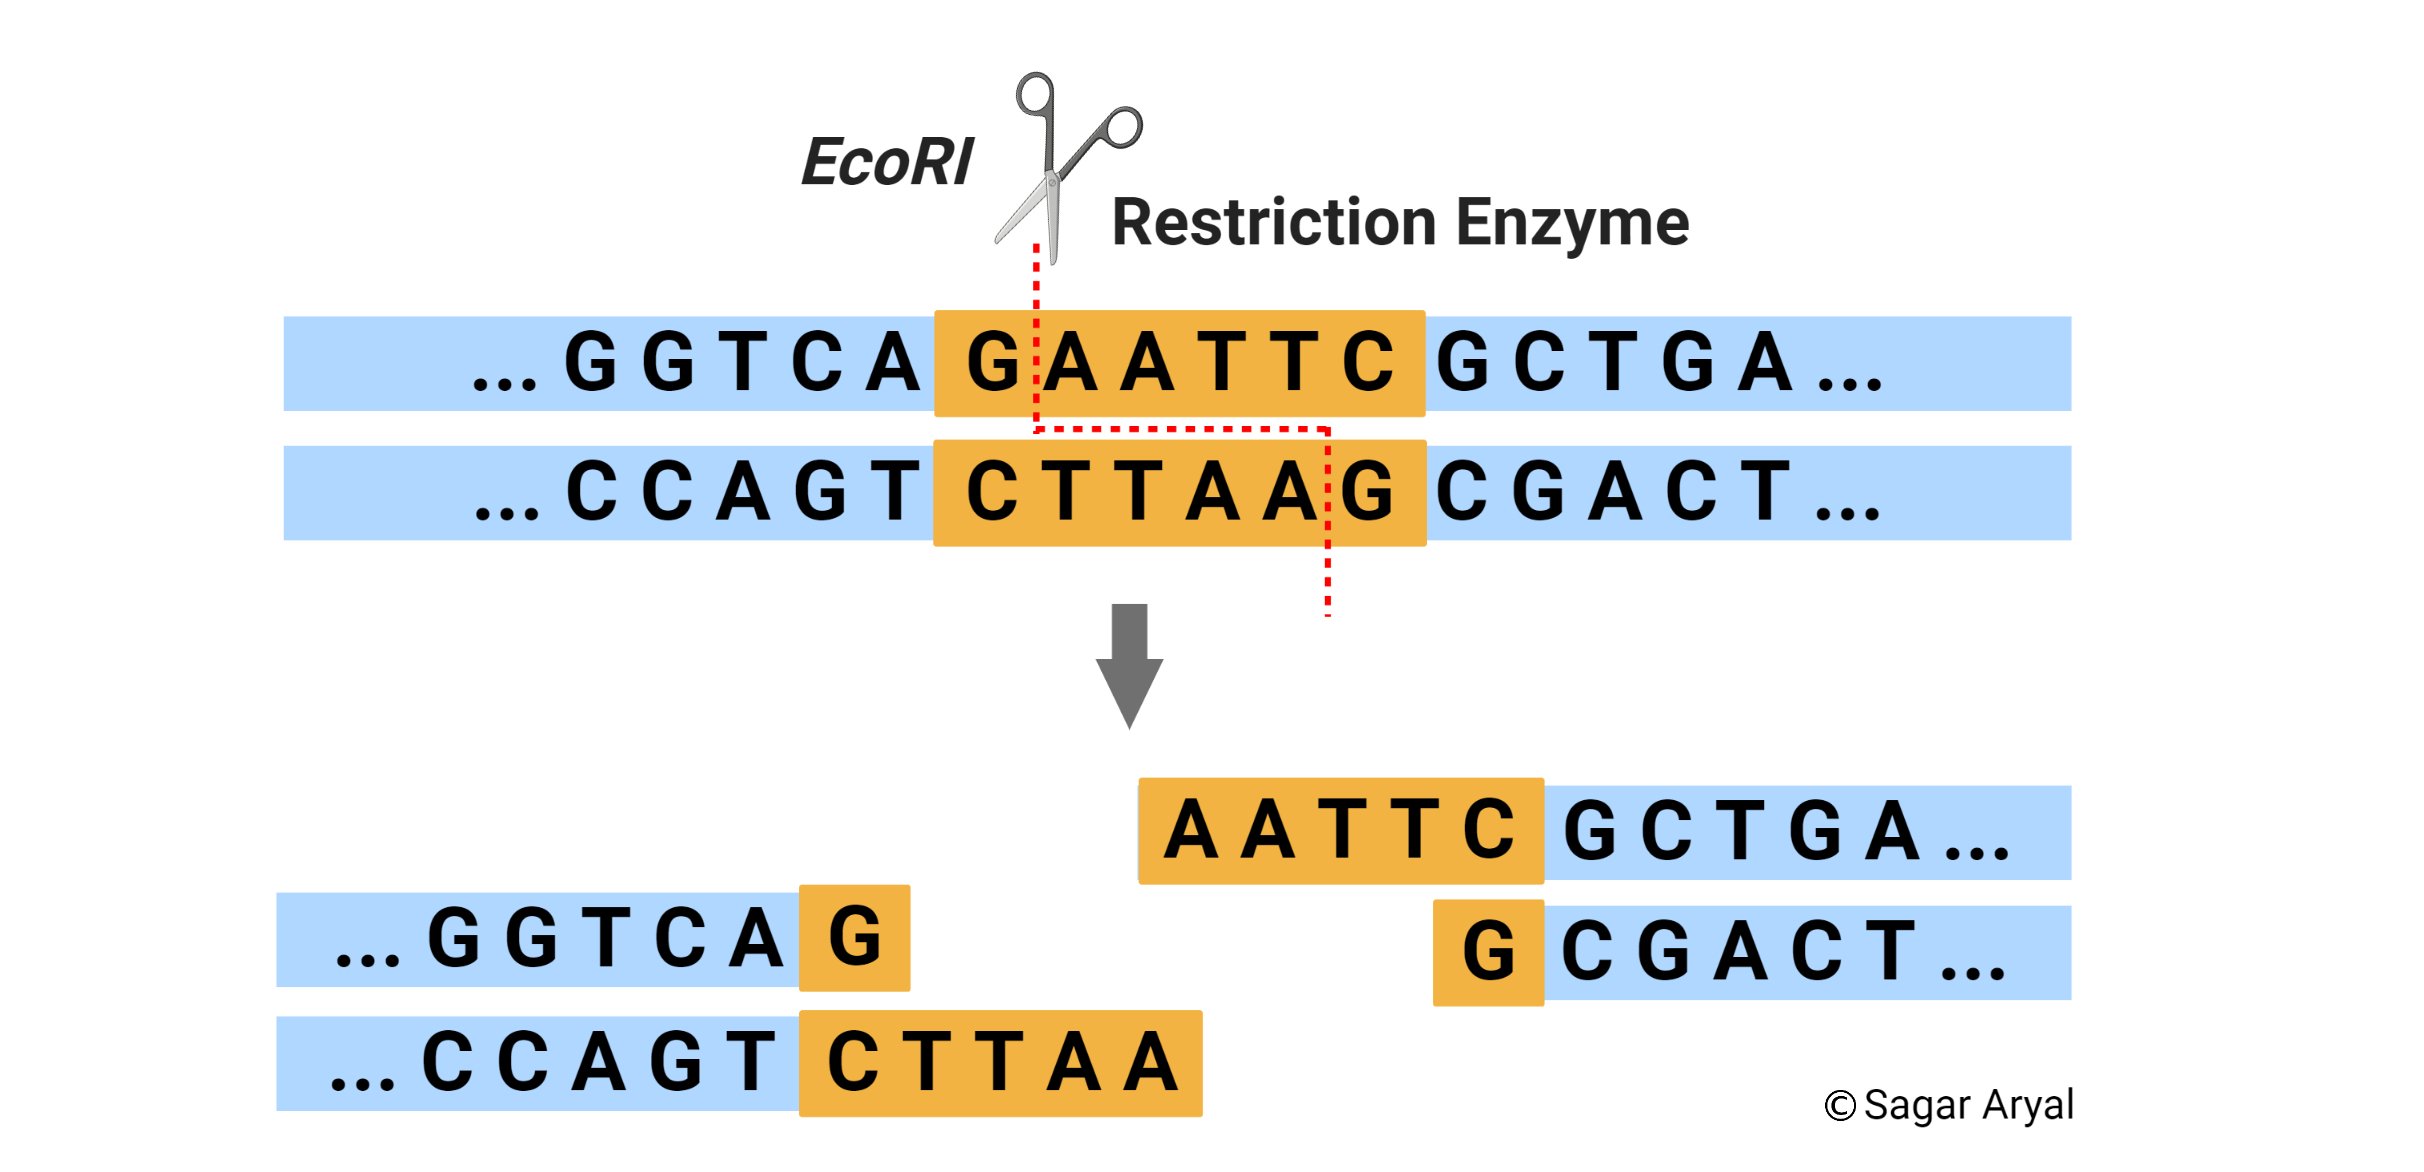 Restriction Enzyme (Restriction Endonuclease)